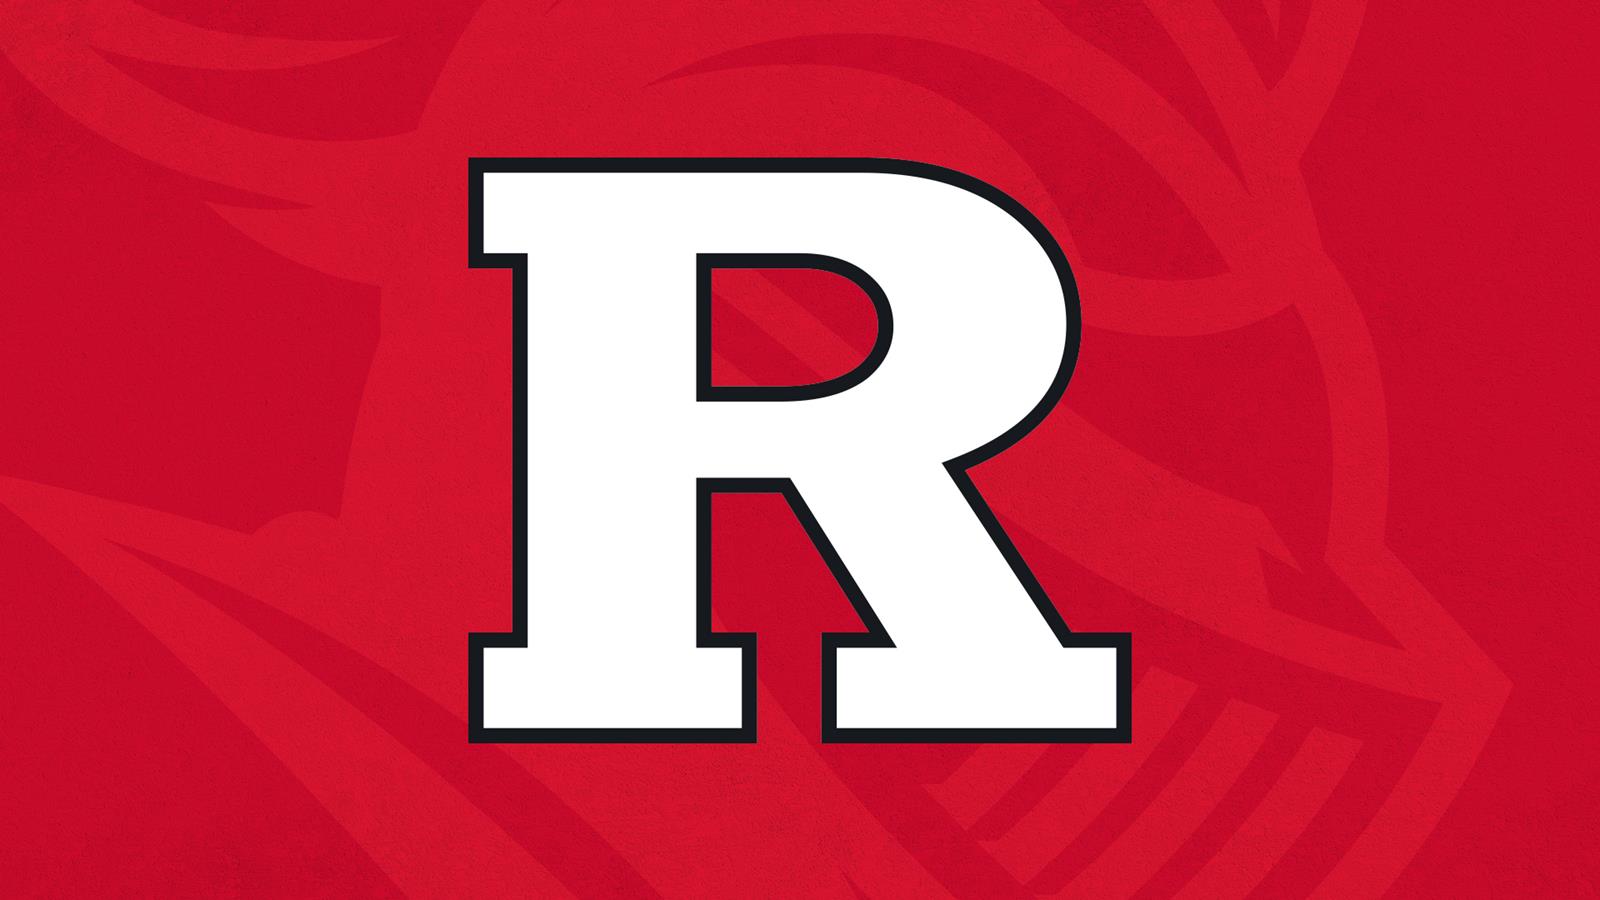 Coquese Washington excited about Year 2 at Rutgers - The Next